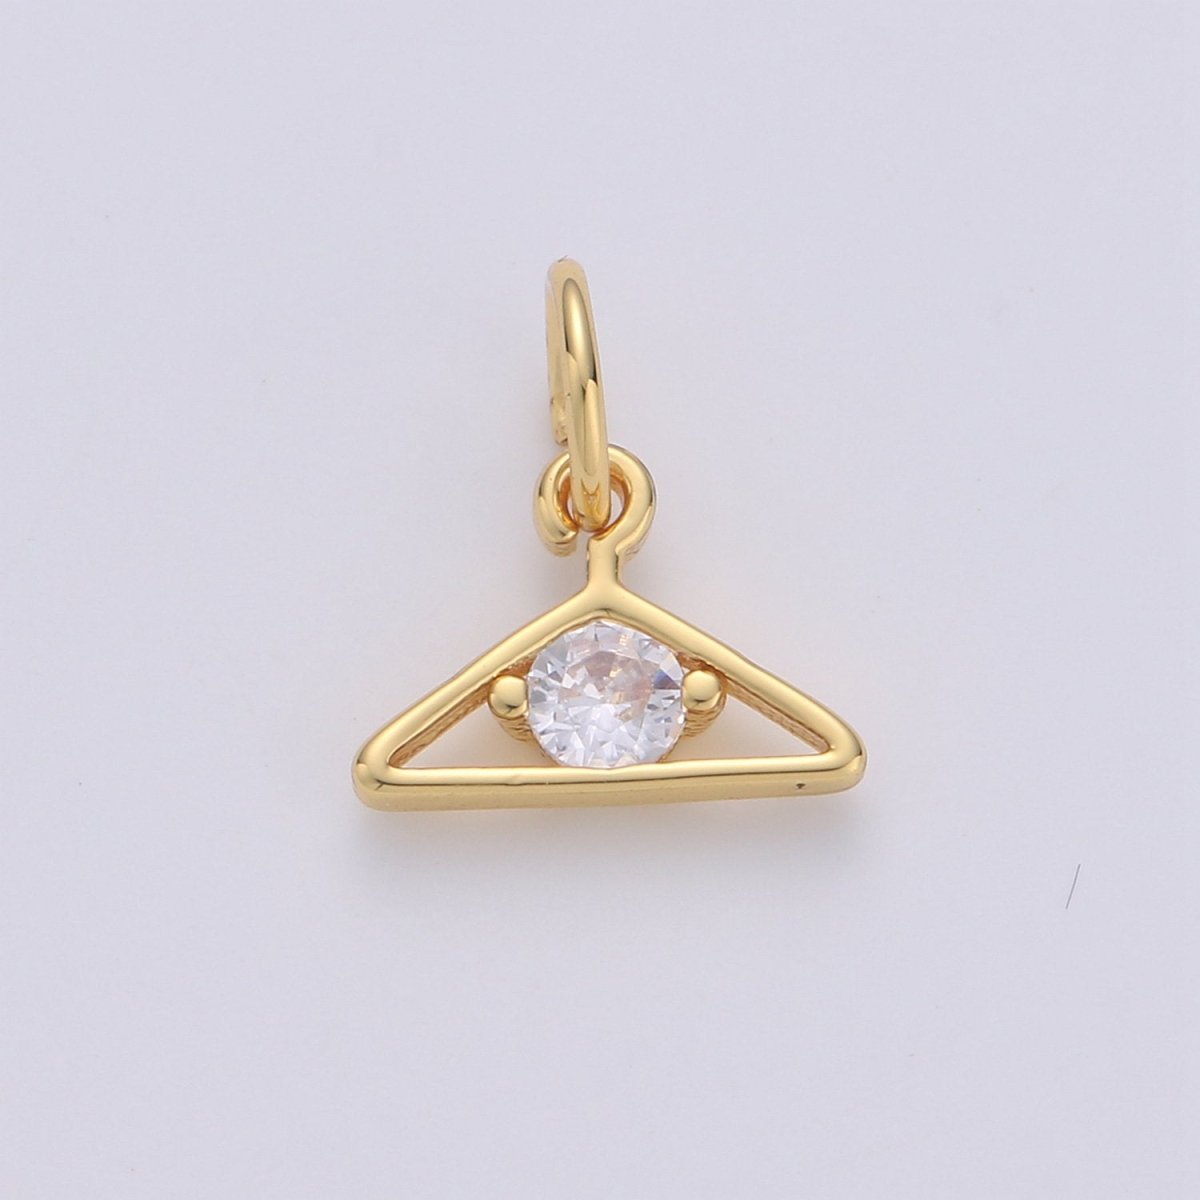 Hanger Charms Gold Cloth Hanging Pendants Mini Design Earrings Bracelet Necklace Charm Jewelry making supply Gift. D-566 D-567 - DLUXCA